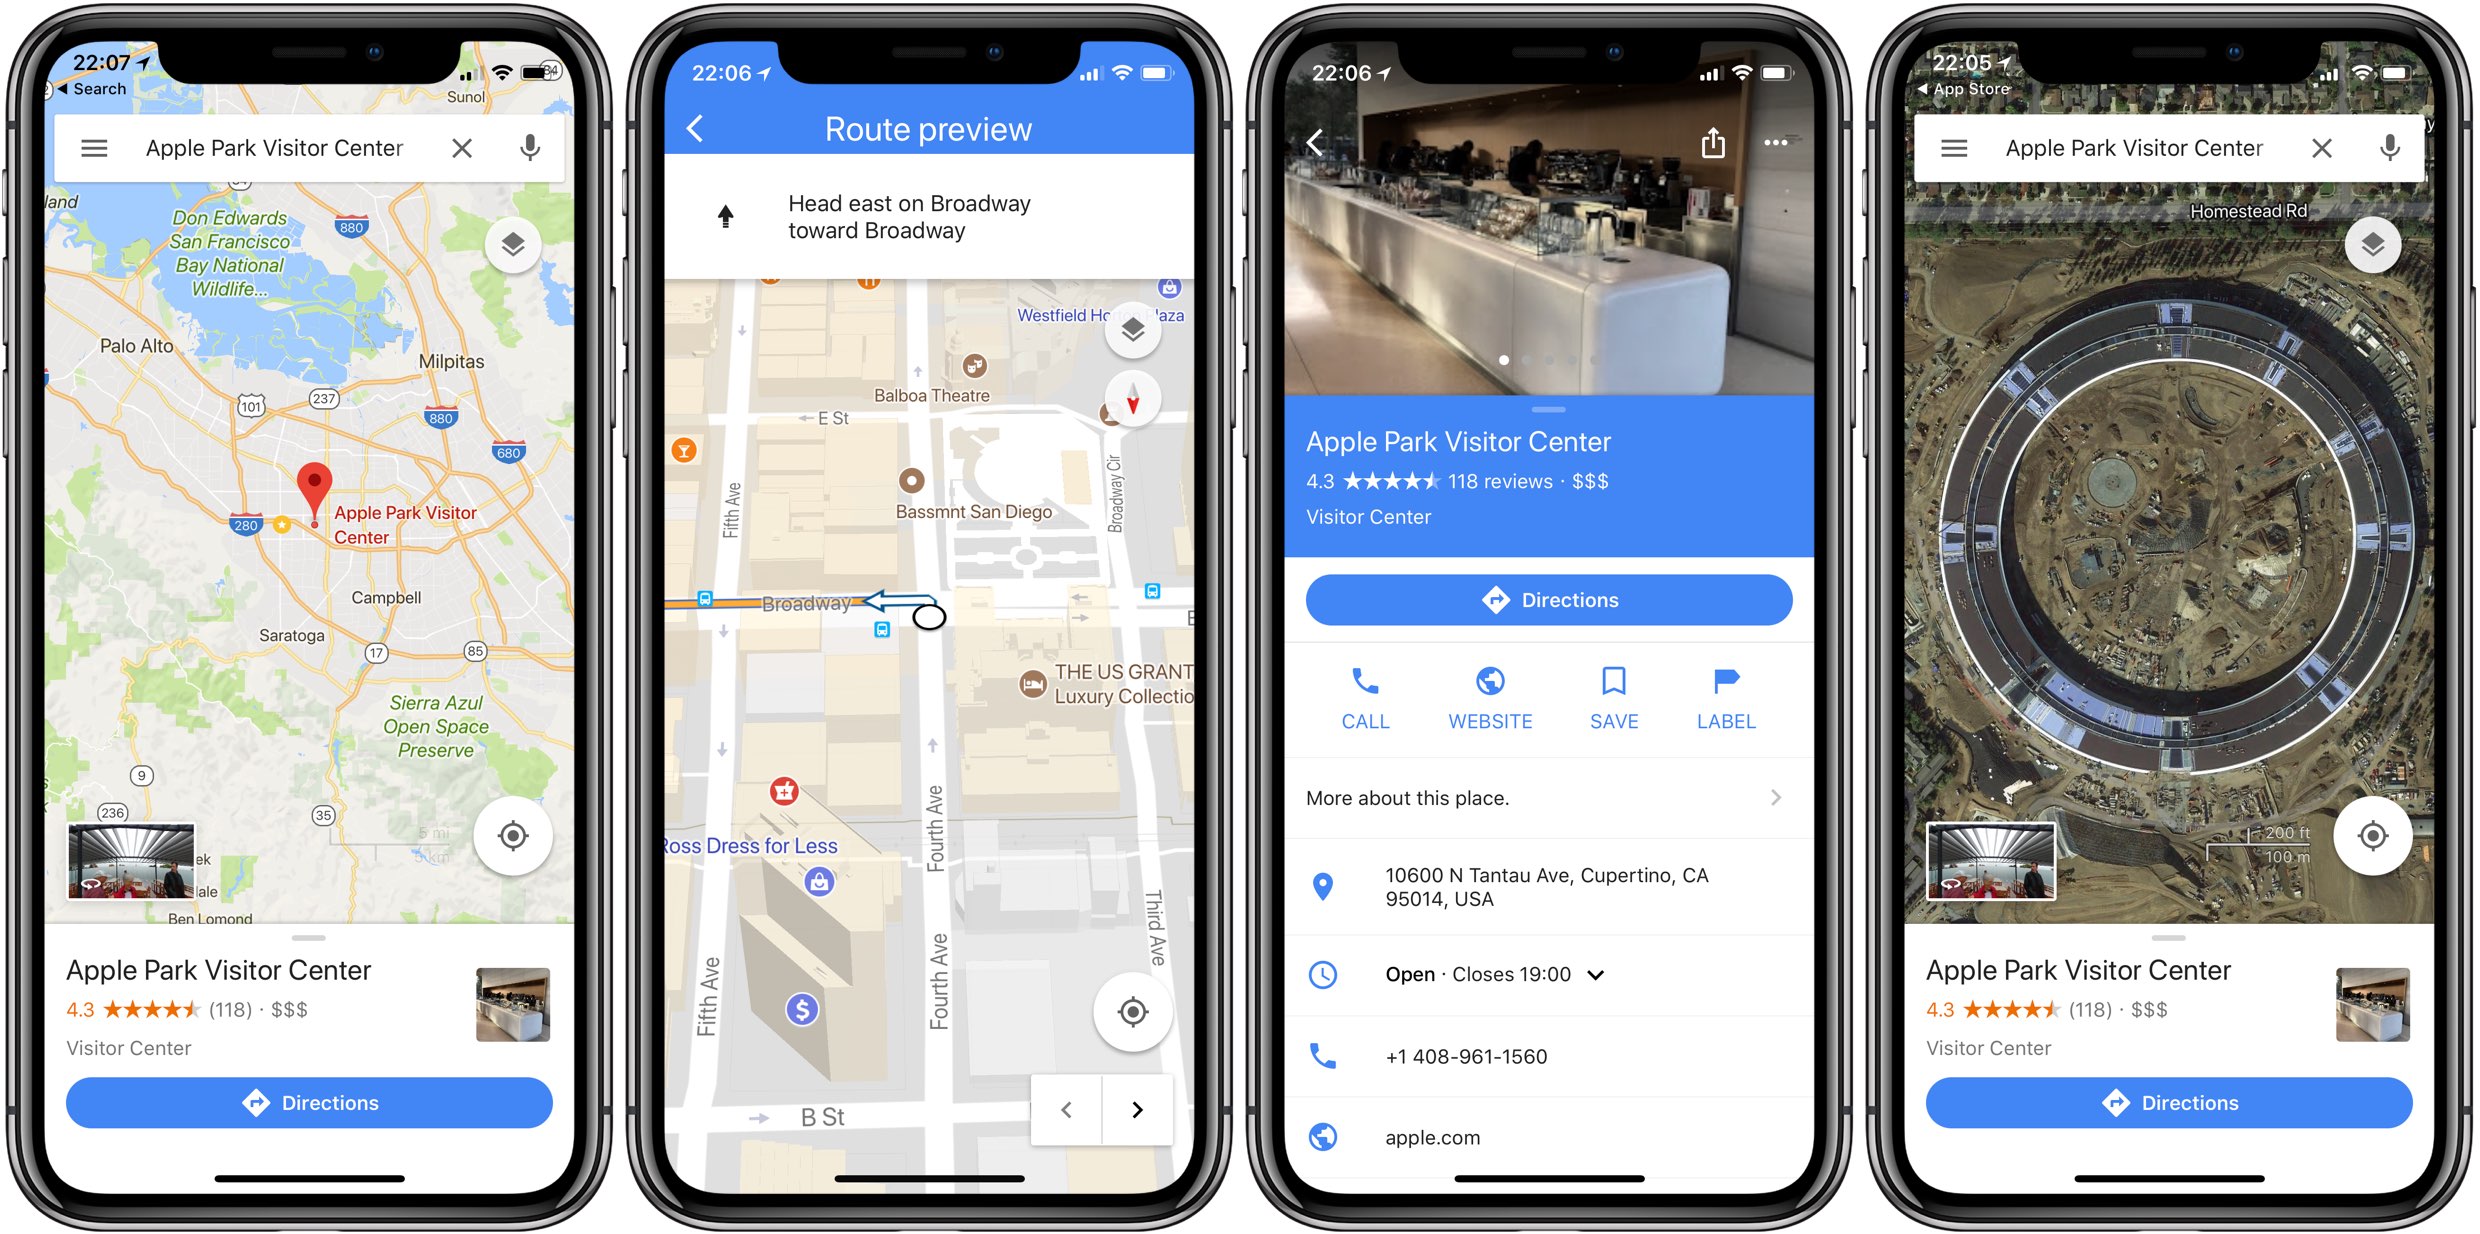 Google Maps App Supports iPhone X With Edge-to-Edge OLED Display